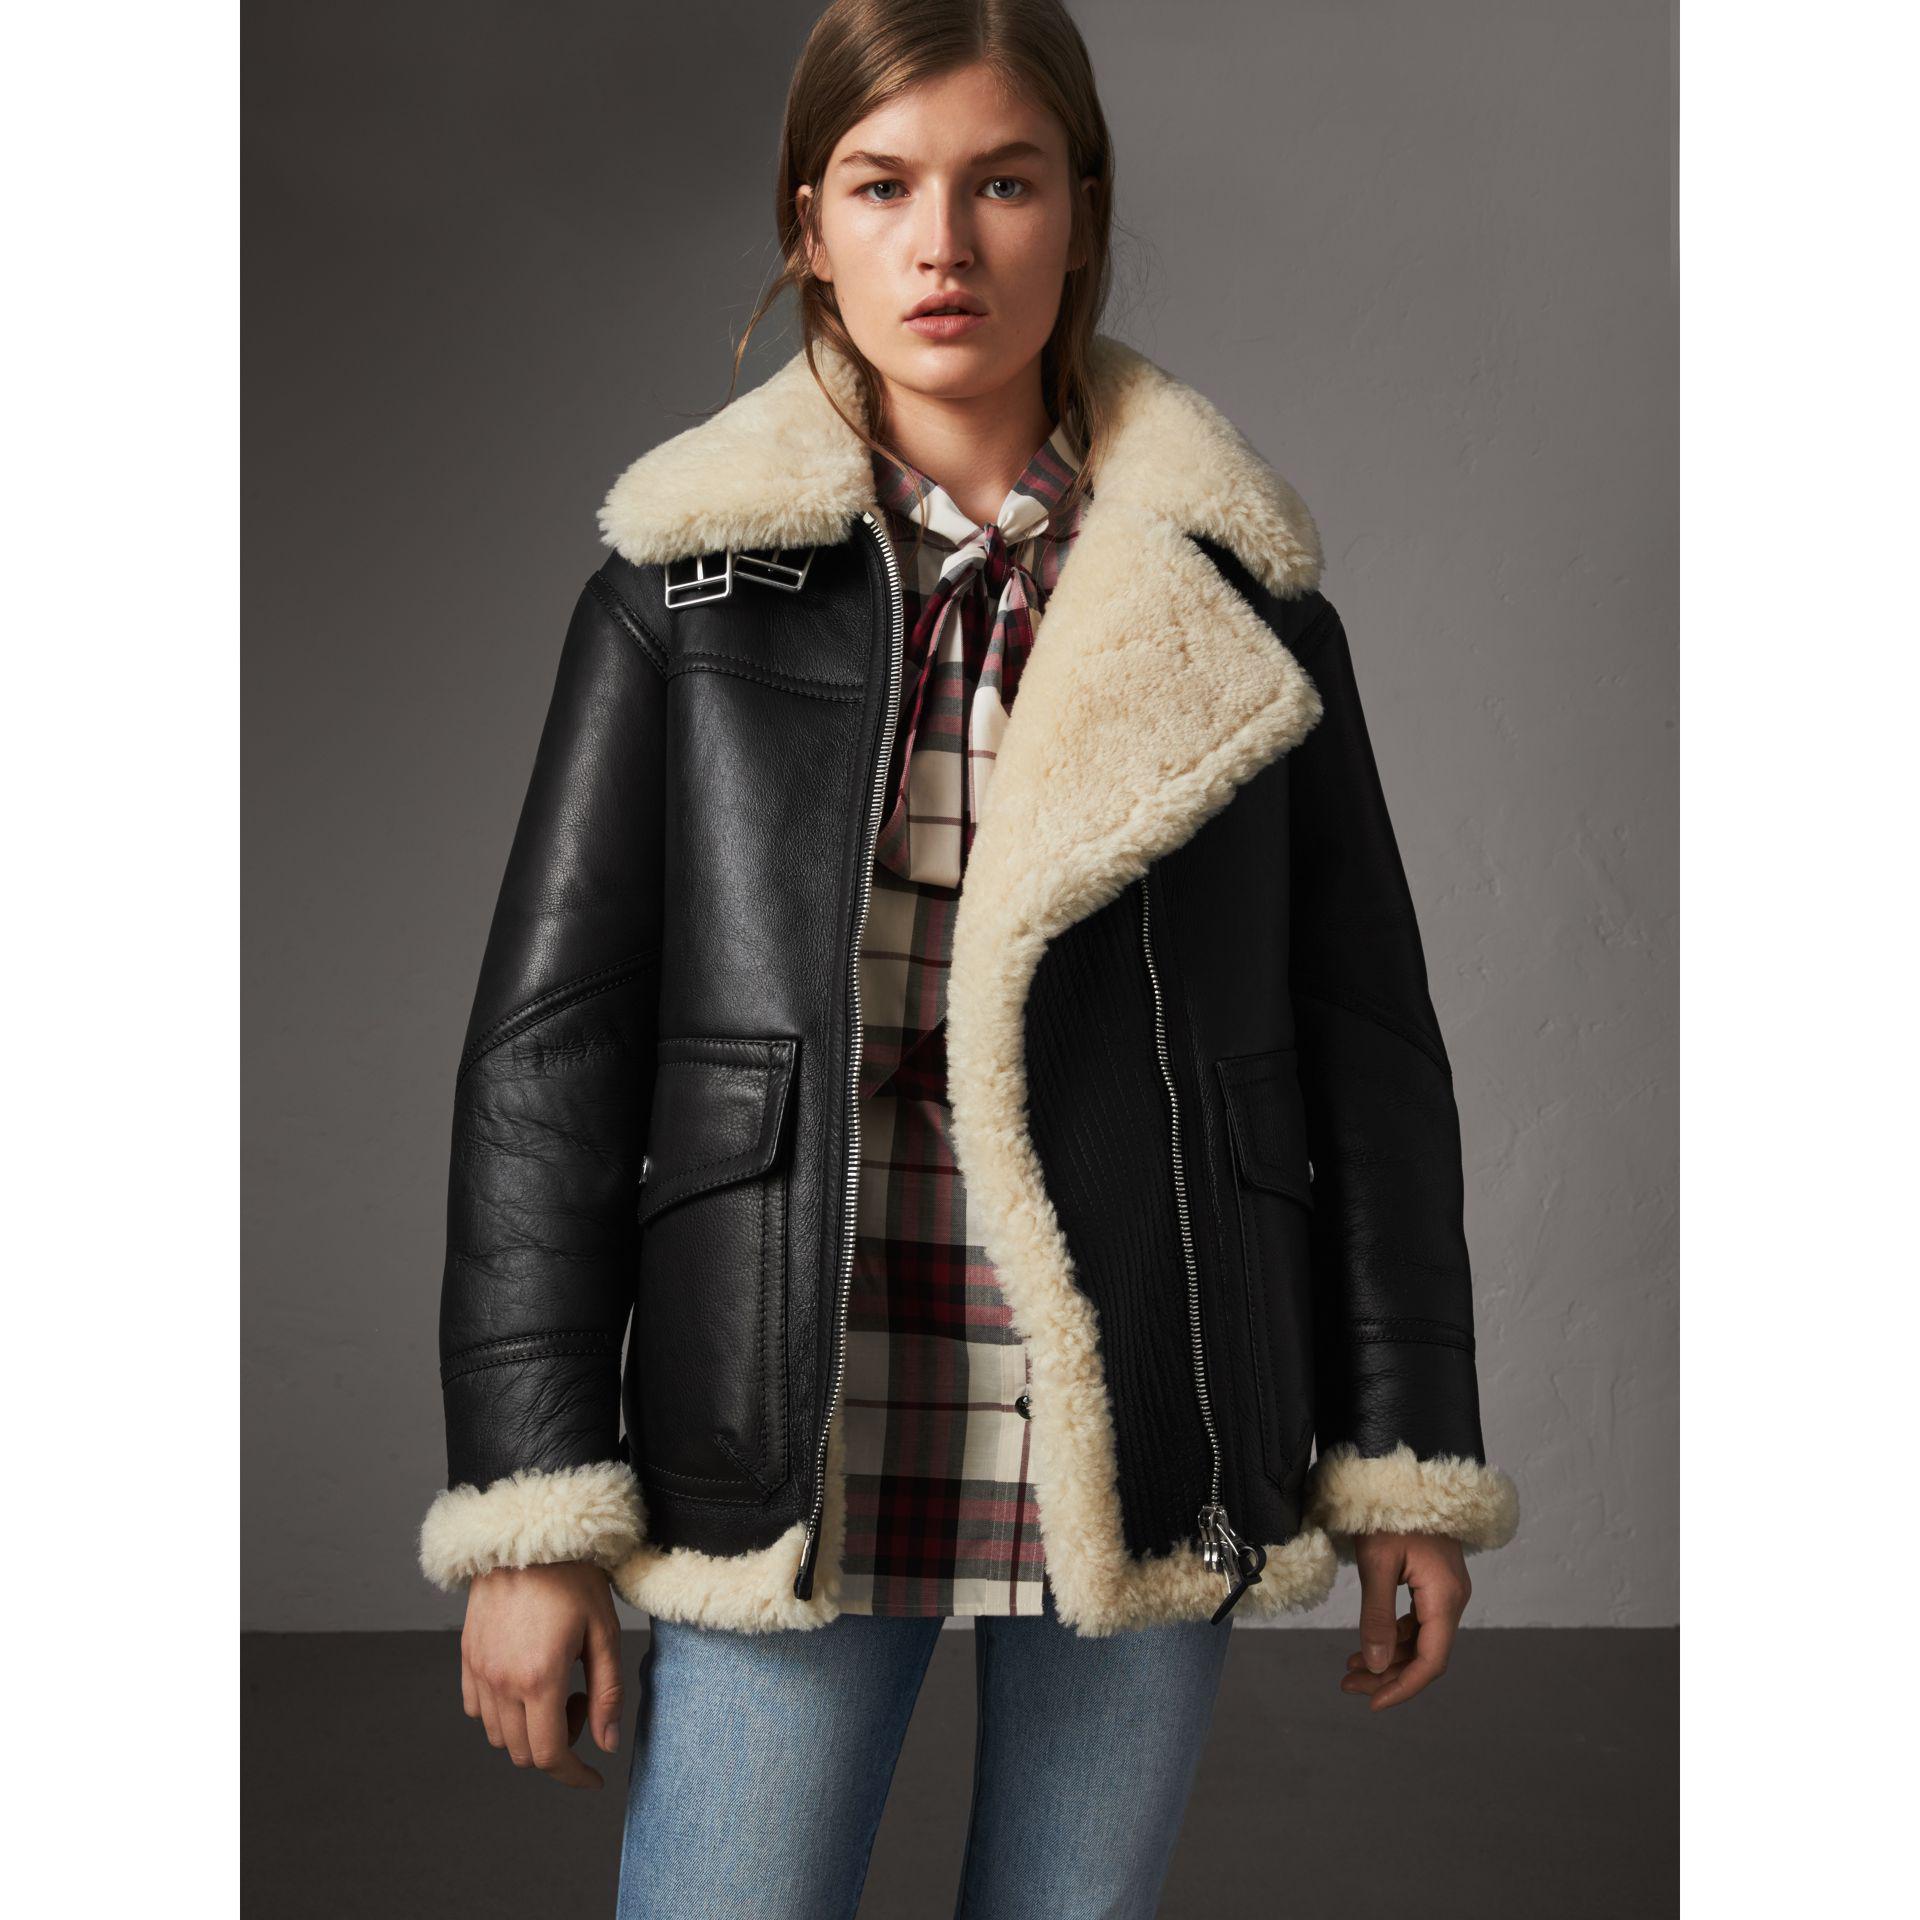 burberry shearling coat sale Online Shopping for Women, Men, Kids Fashion &  Lifestyle|Free Delivery & Returns! -